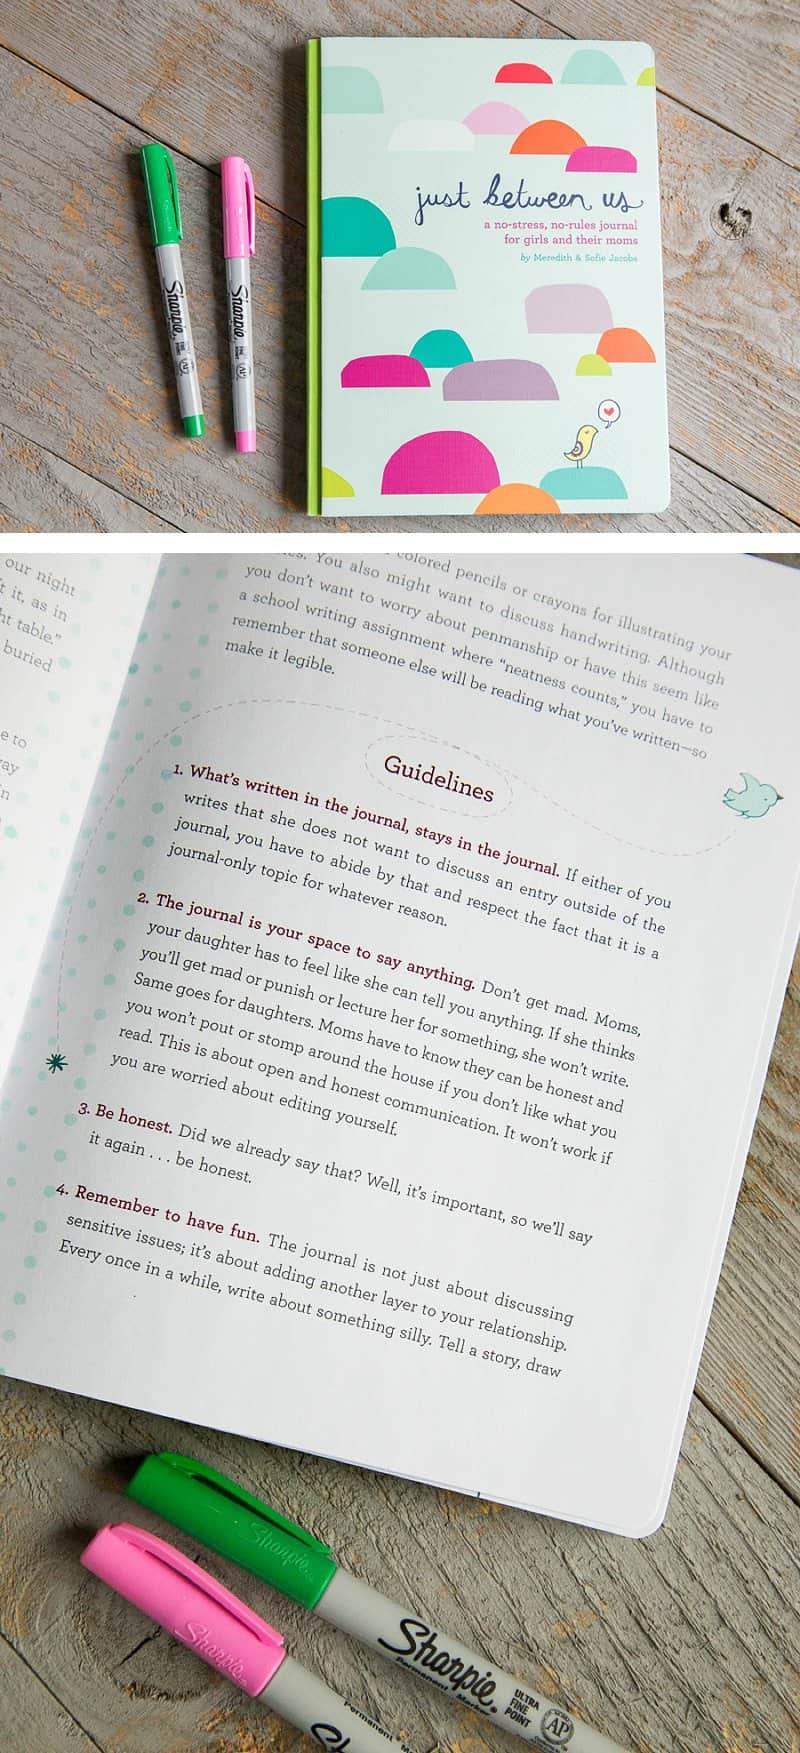 Just Between Us Journal: How to Use a Mother-Daughter Journal Ideas for your Tween or Teen *These mother-daughter journal prompts are great!